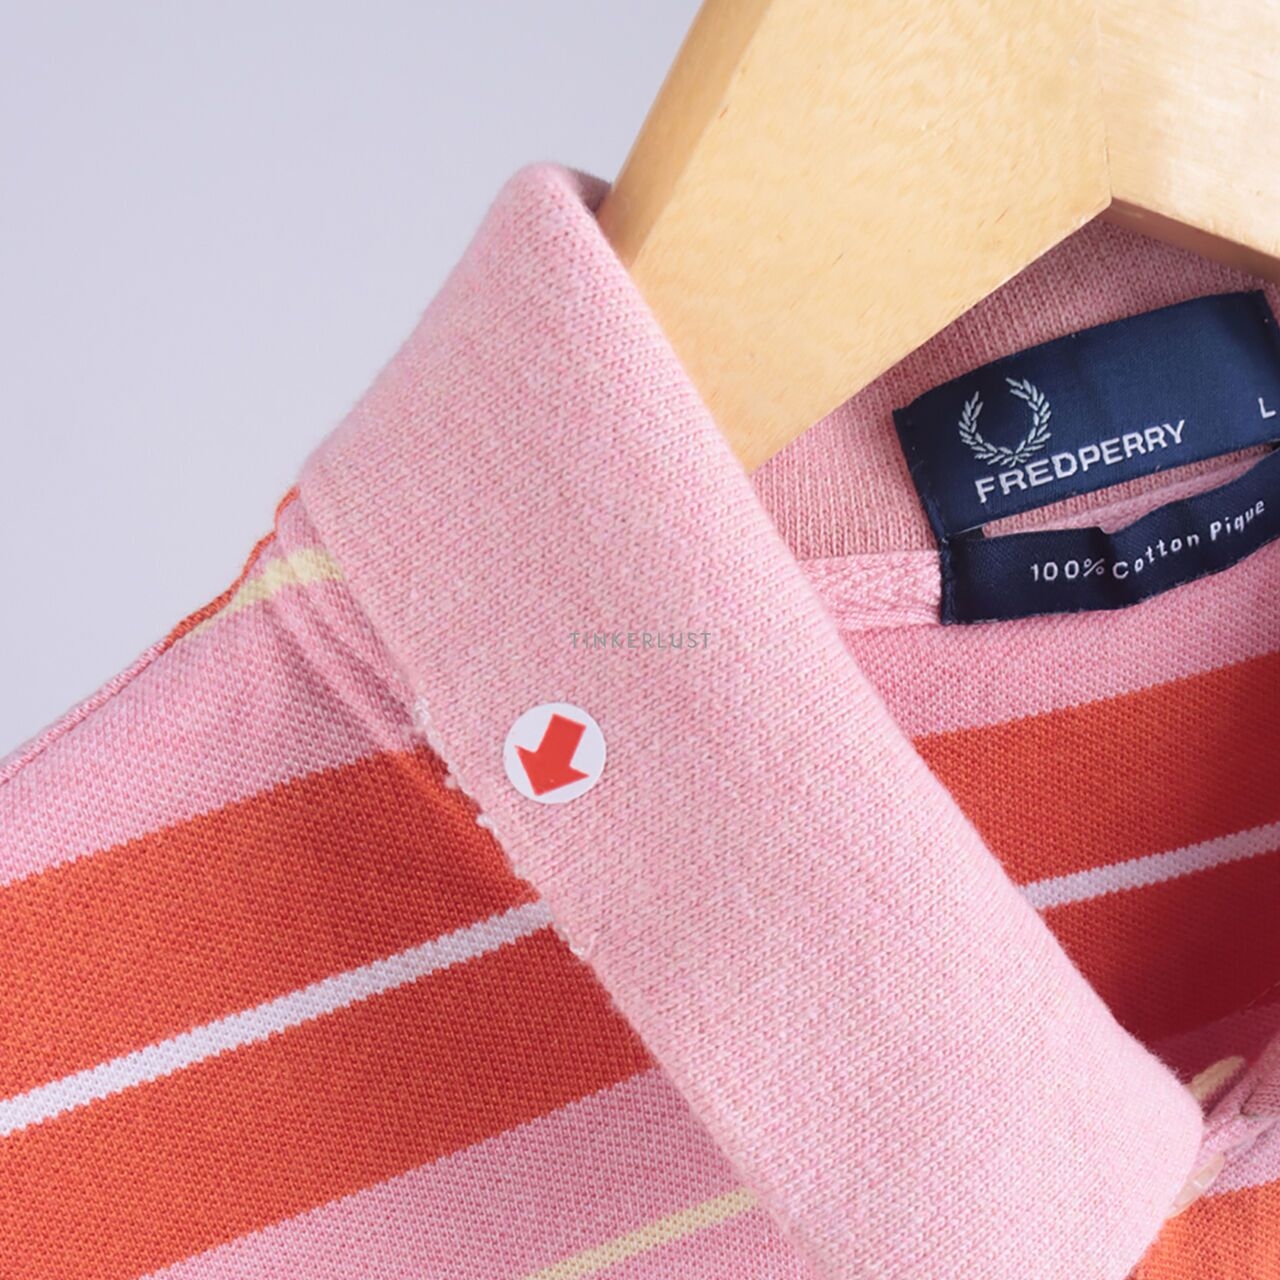 Fred Perry Orange & Pink Stripes Polo T-Shirt